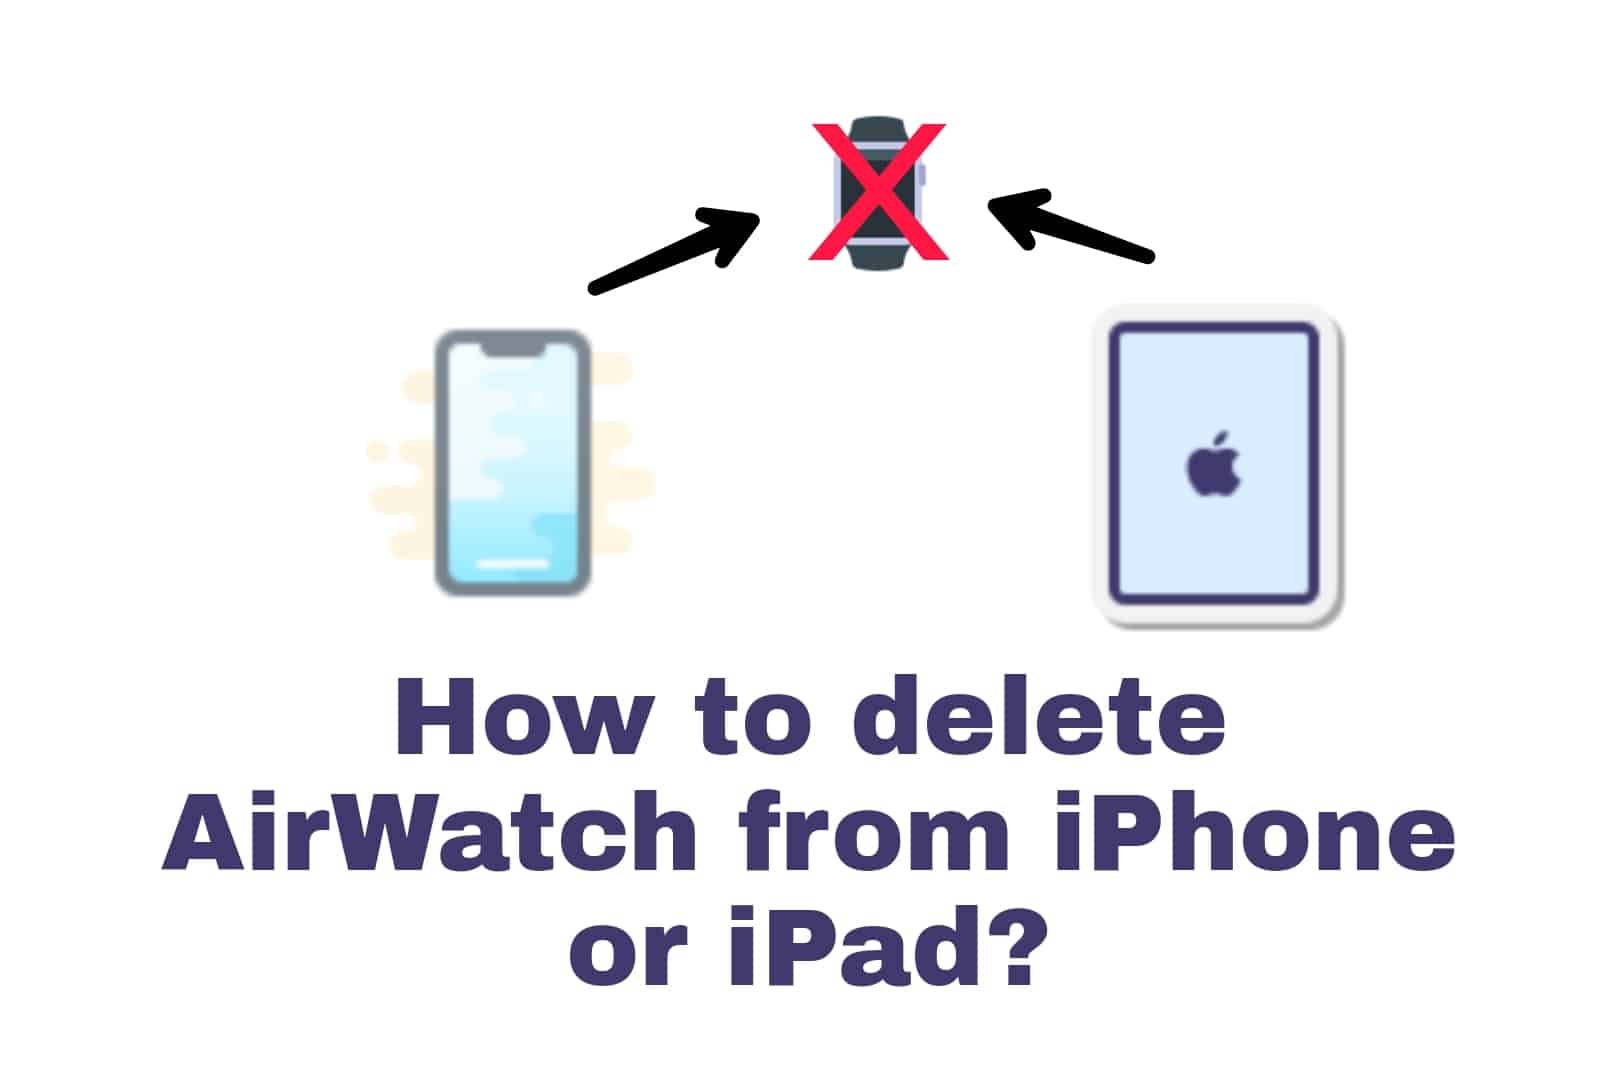 How to delete AirWatch from iPhone and iPad